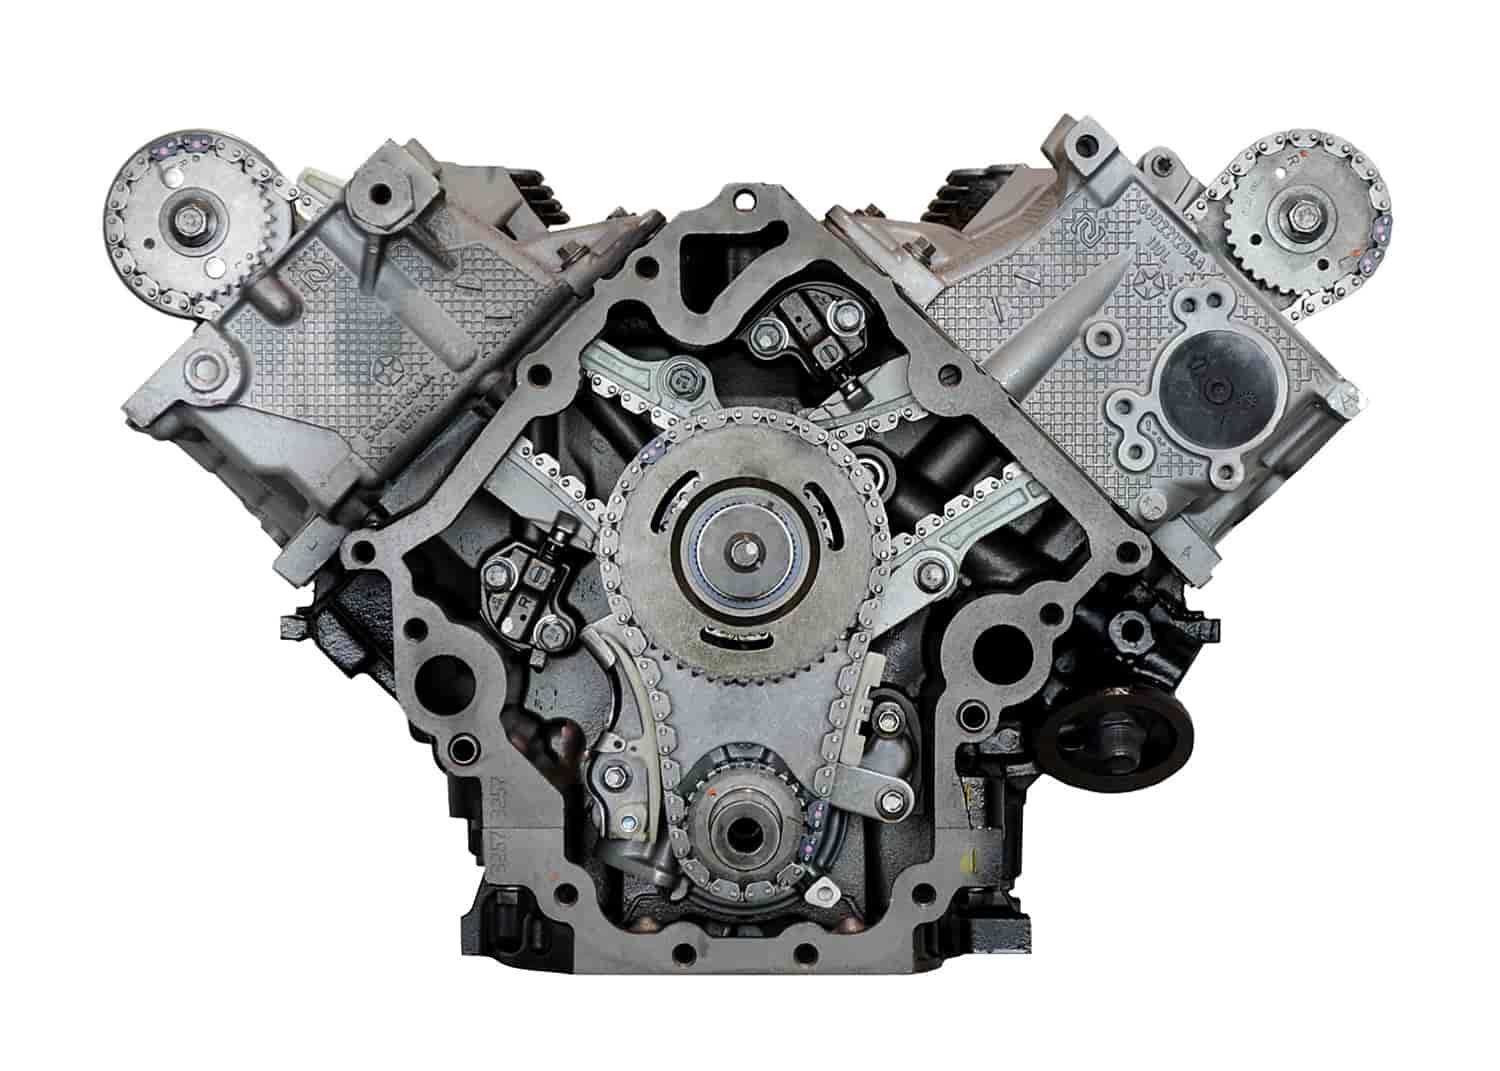 Remanufactured Crate Engine for 2008-2013 Chrysler/Dodge/Jeep/Ram with 4.7L V8